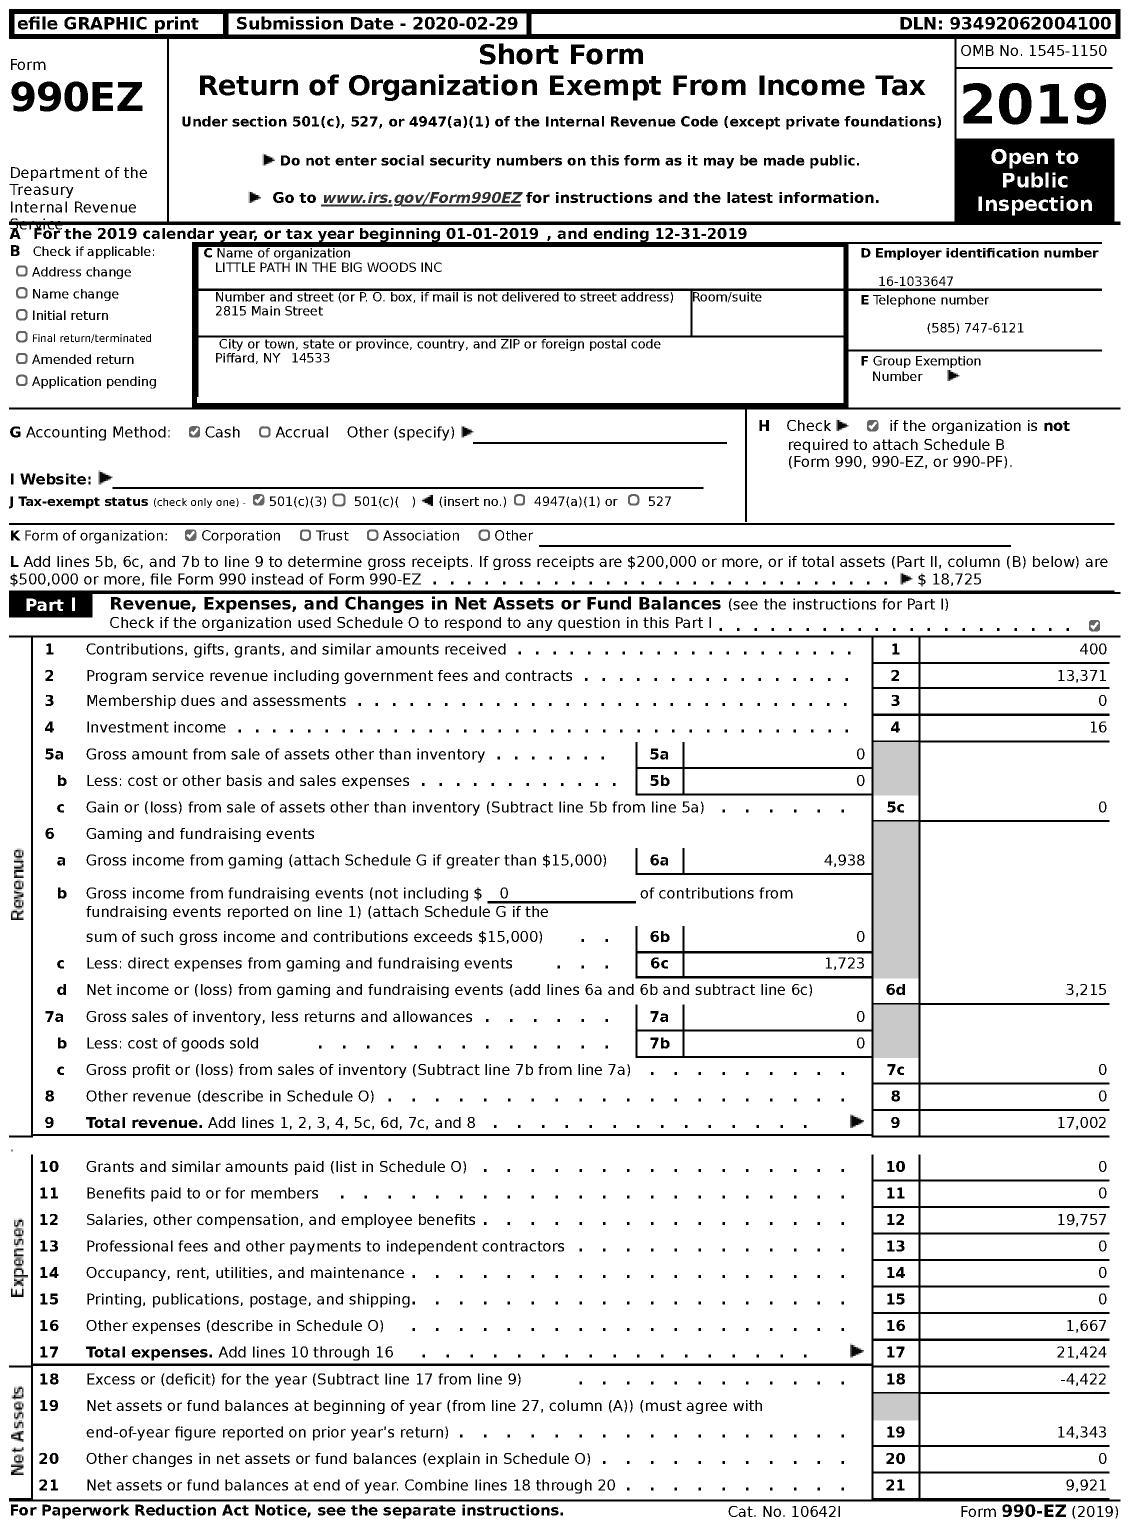 Image of first page of 2019 Form 990EZ for Little Path in the Big Woods